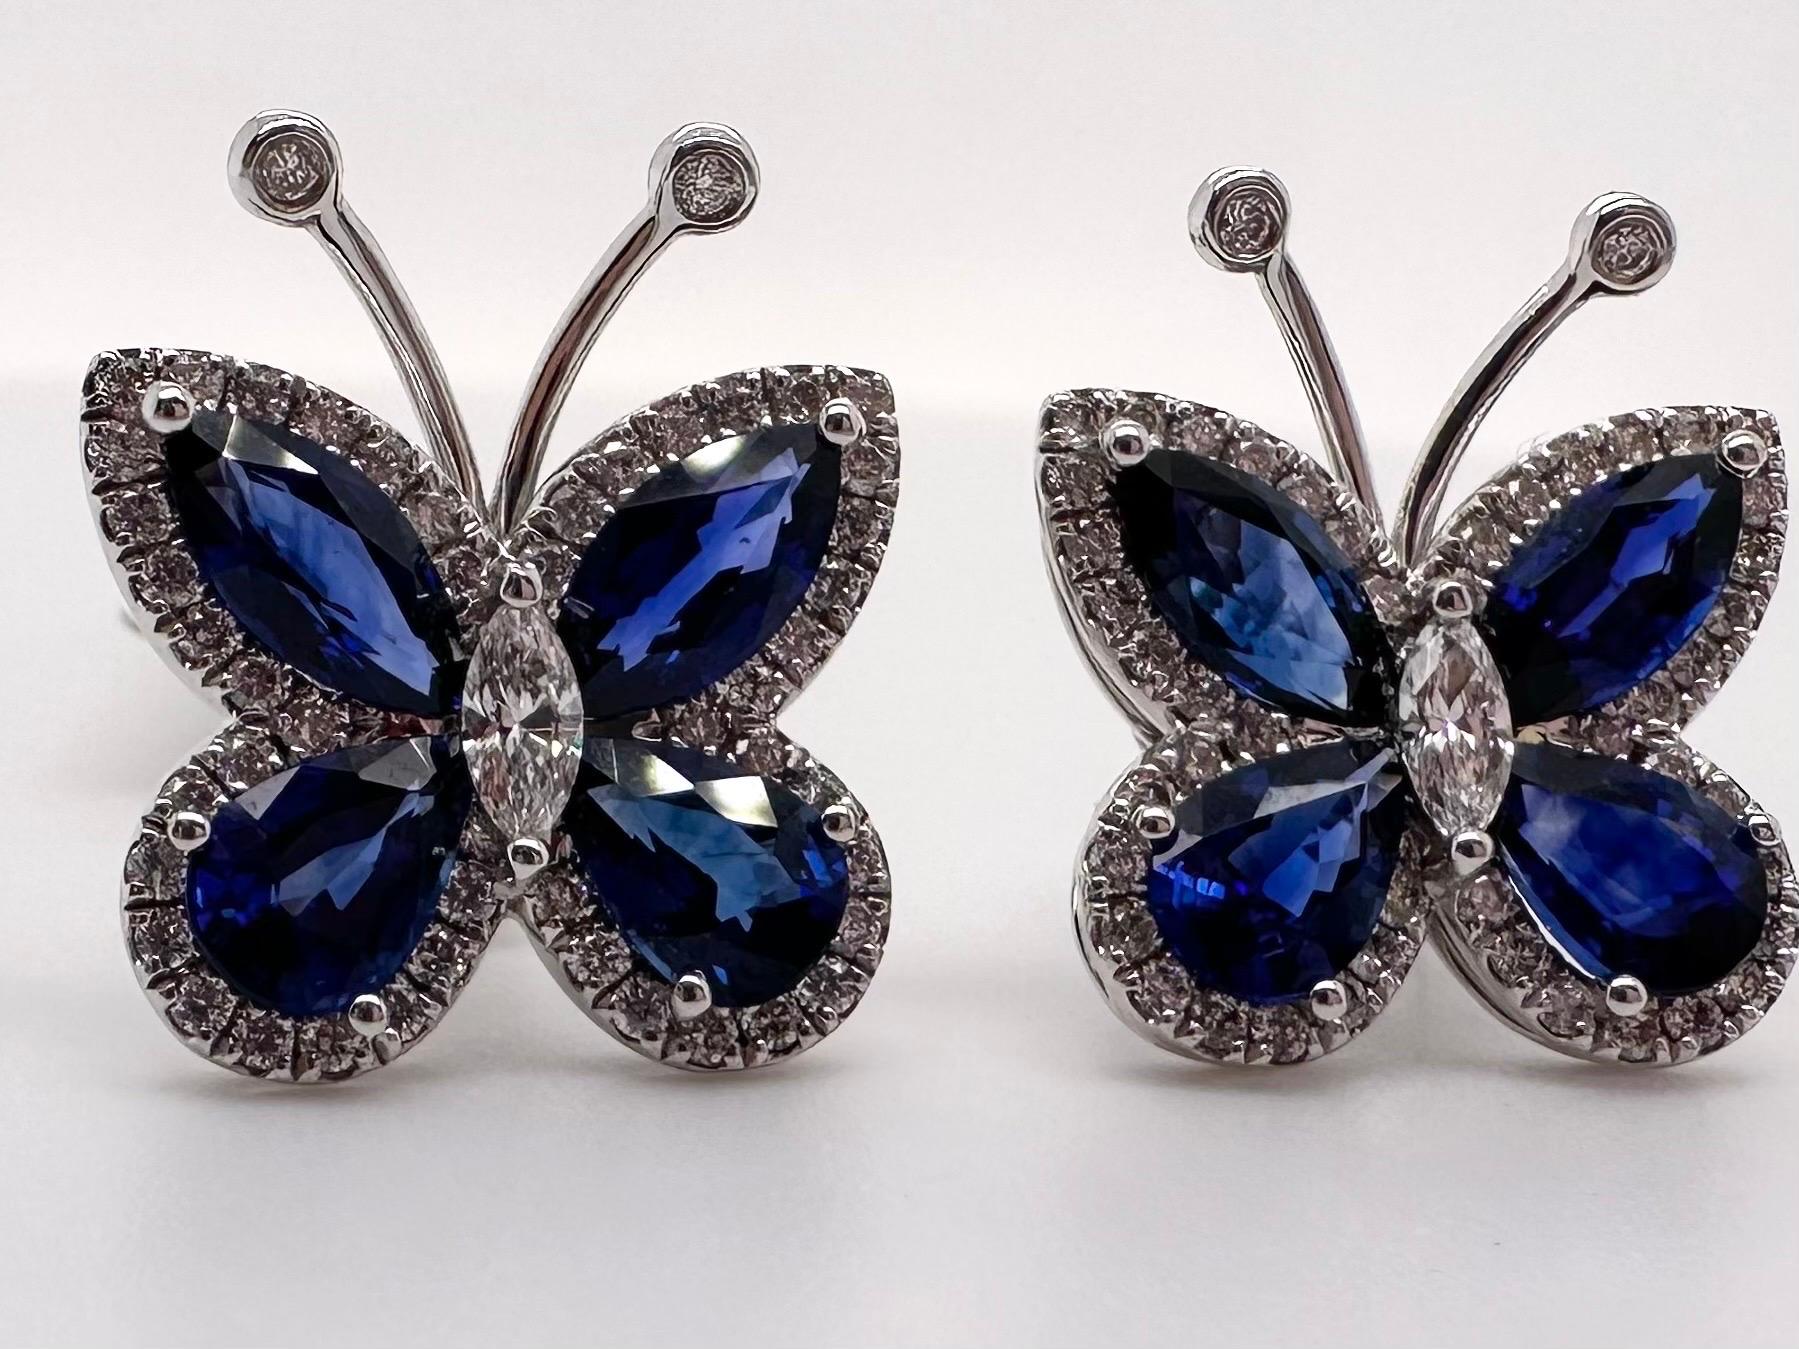 Fantastic buttrefly earrings, luxuriously made with fine sapphires and diamonds in 18KT white gold!

Metal Type: 18KT
Gram Weight:4.67 grams 

Natural Sapphire(s):
Color: Blue
Cut:Marquise
Carat: 3.76ct
Clarity: Slightly Included

Natural